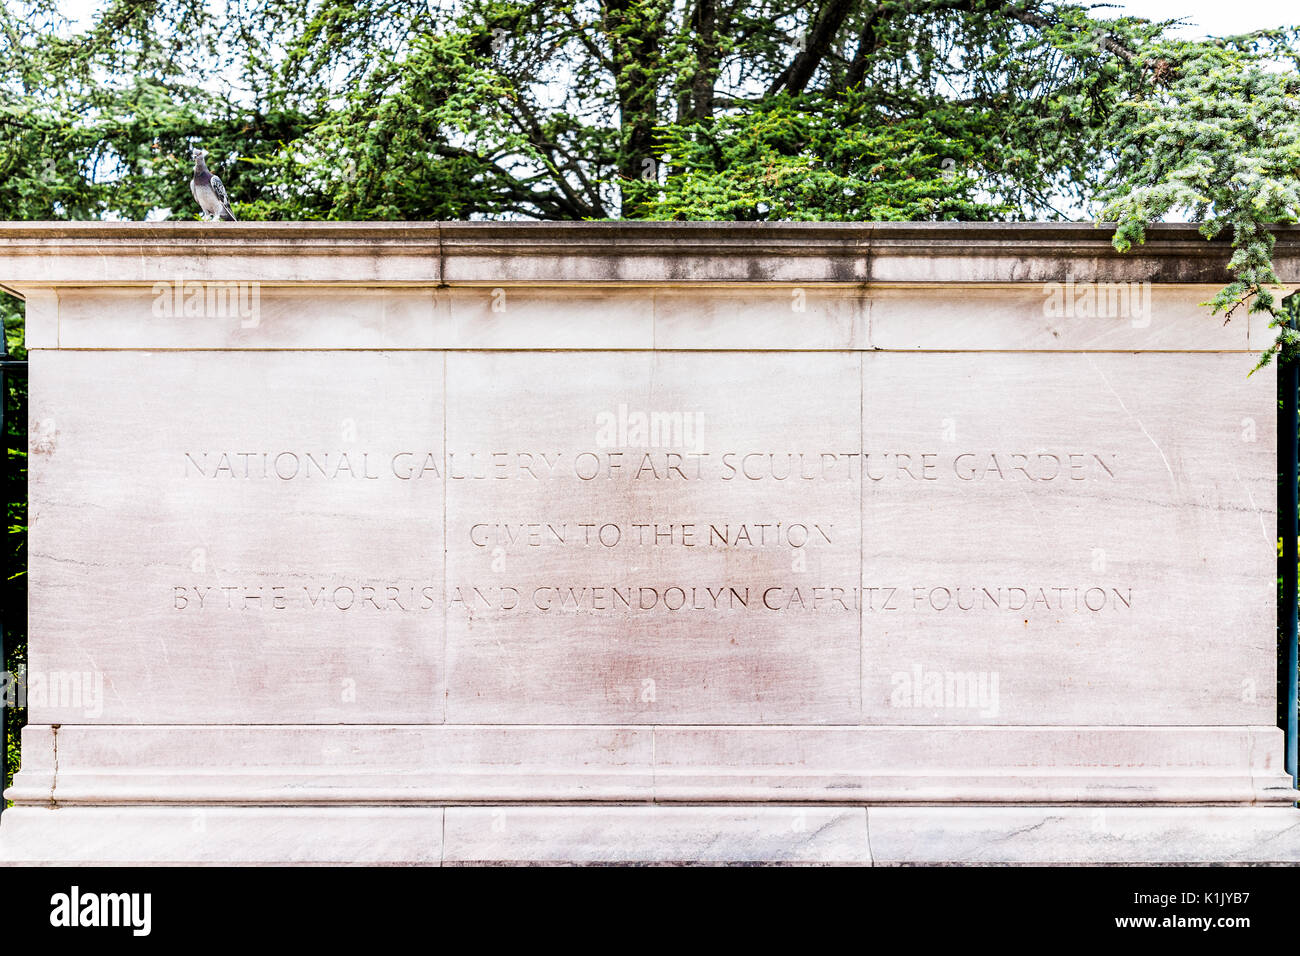 Washington DC, USA - July 3, 2017: Closeup of sign for National Gallery of Art Sculpture Garden in summer on National Mall Stock Photo